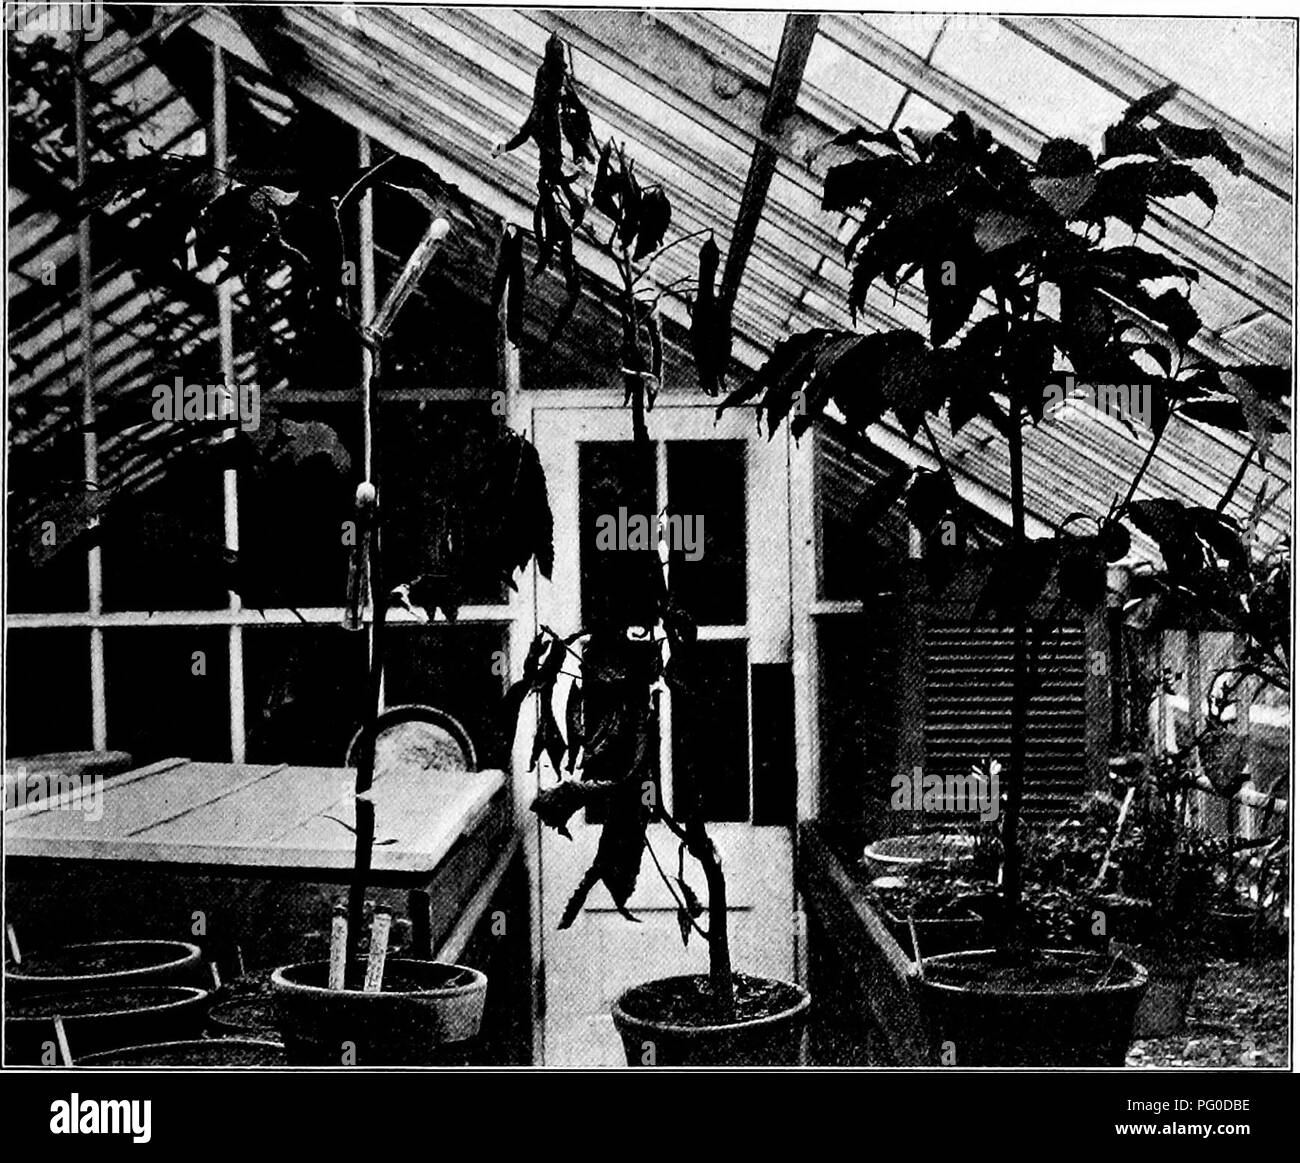 . Chestnut blight. Chestnut blight; Chestnut. 205 An attempt was made by Mr. Merkel, * chiet forester at the Zoological Park, to control the disease by spraying, but I believe he considers the condition quite hopeless. Practically all of the. Fig. 26. Young chestnut trees at the propagating houses used in the inocu- lation experiments. The tree on the right was not inoculated, being reserved as a check. The tree on the left shows two twigs killed. The top one was inoculated with the fungus March 21 and was completely girdled by April 14. By August 26 the fungus had reached a point nearly, an i Stock Photo